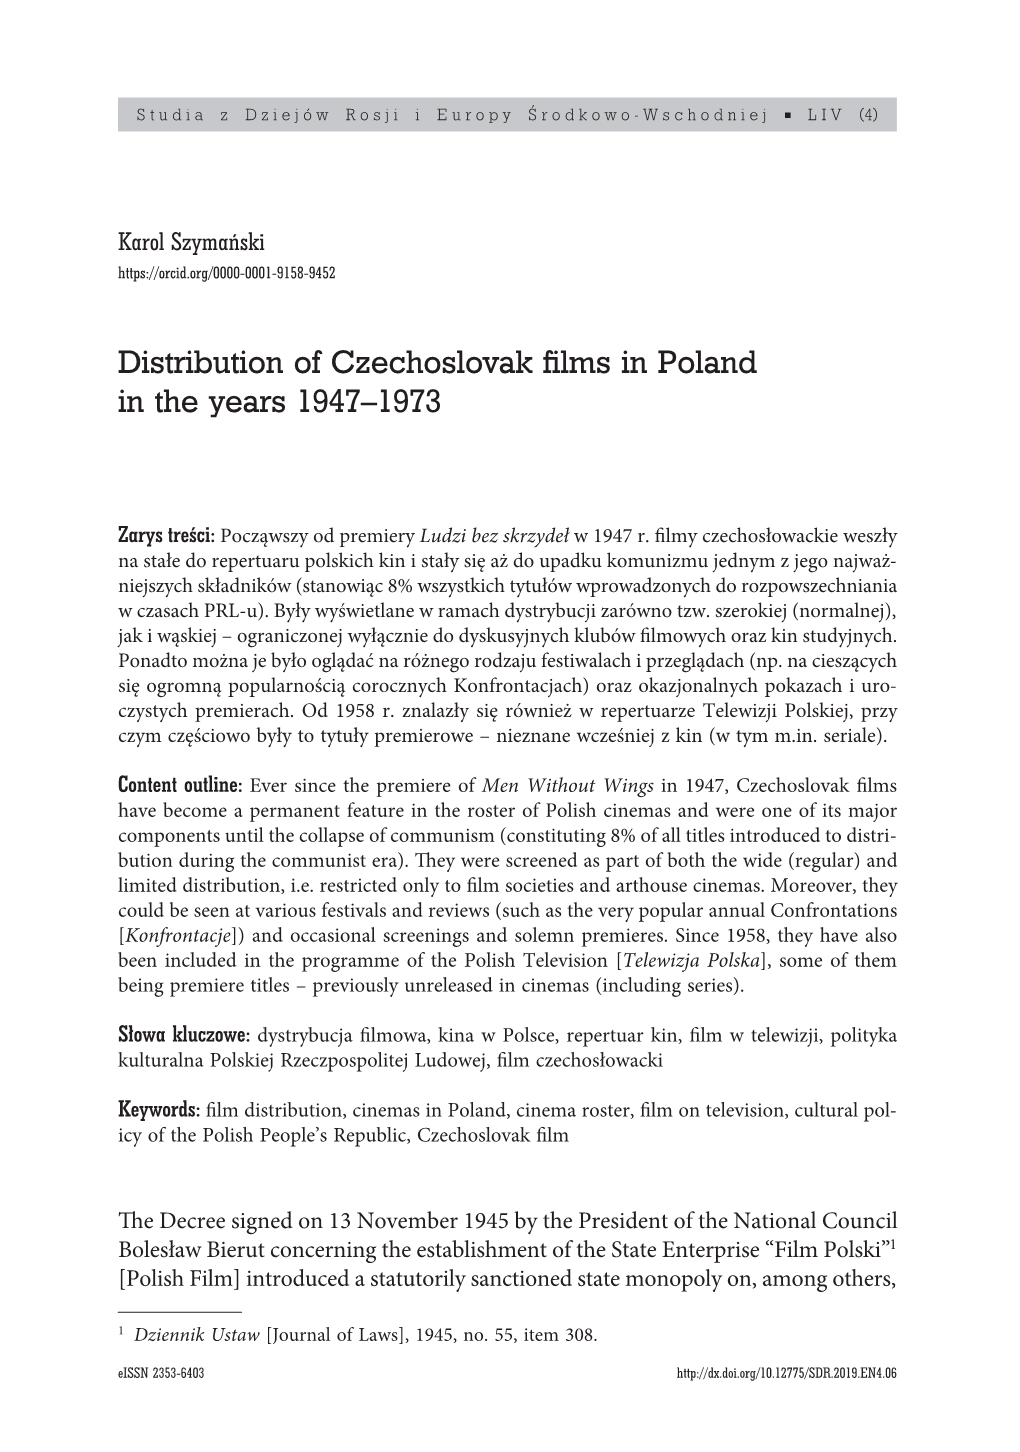 Distribution of Czechoslovak Films in Poland in the Years 1947–1973